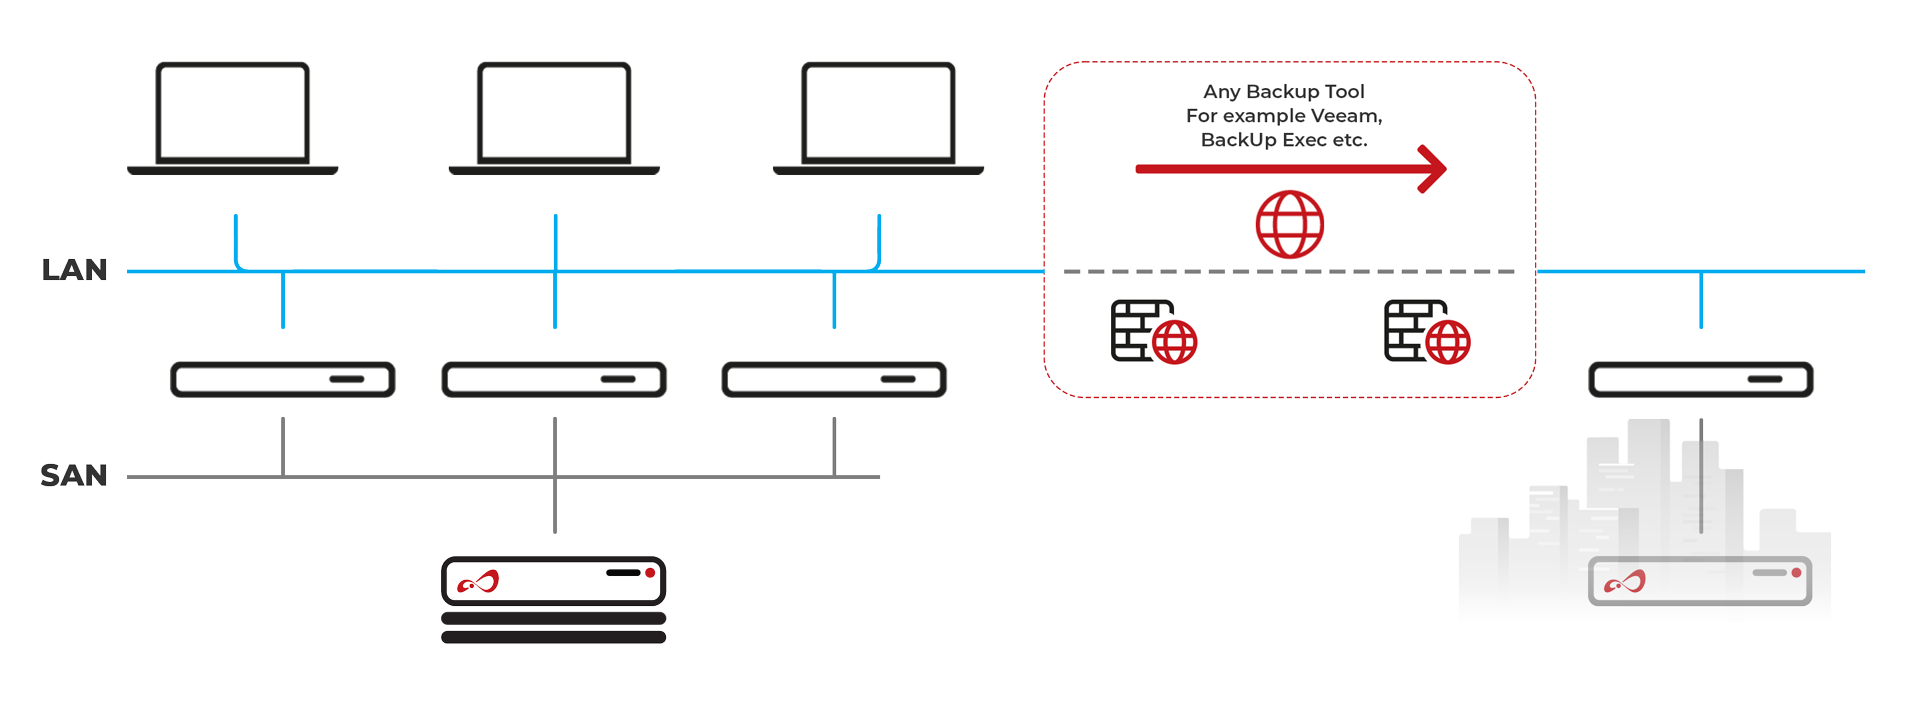 Disaster Recovery for Fibre Channel with 3rd Party Tools scheme